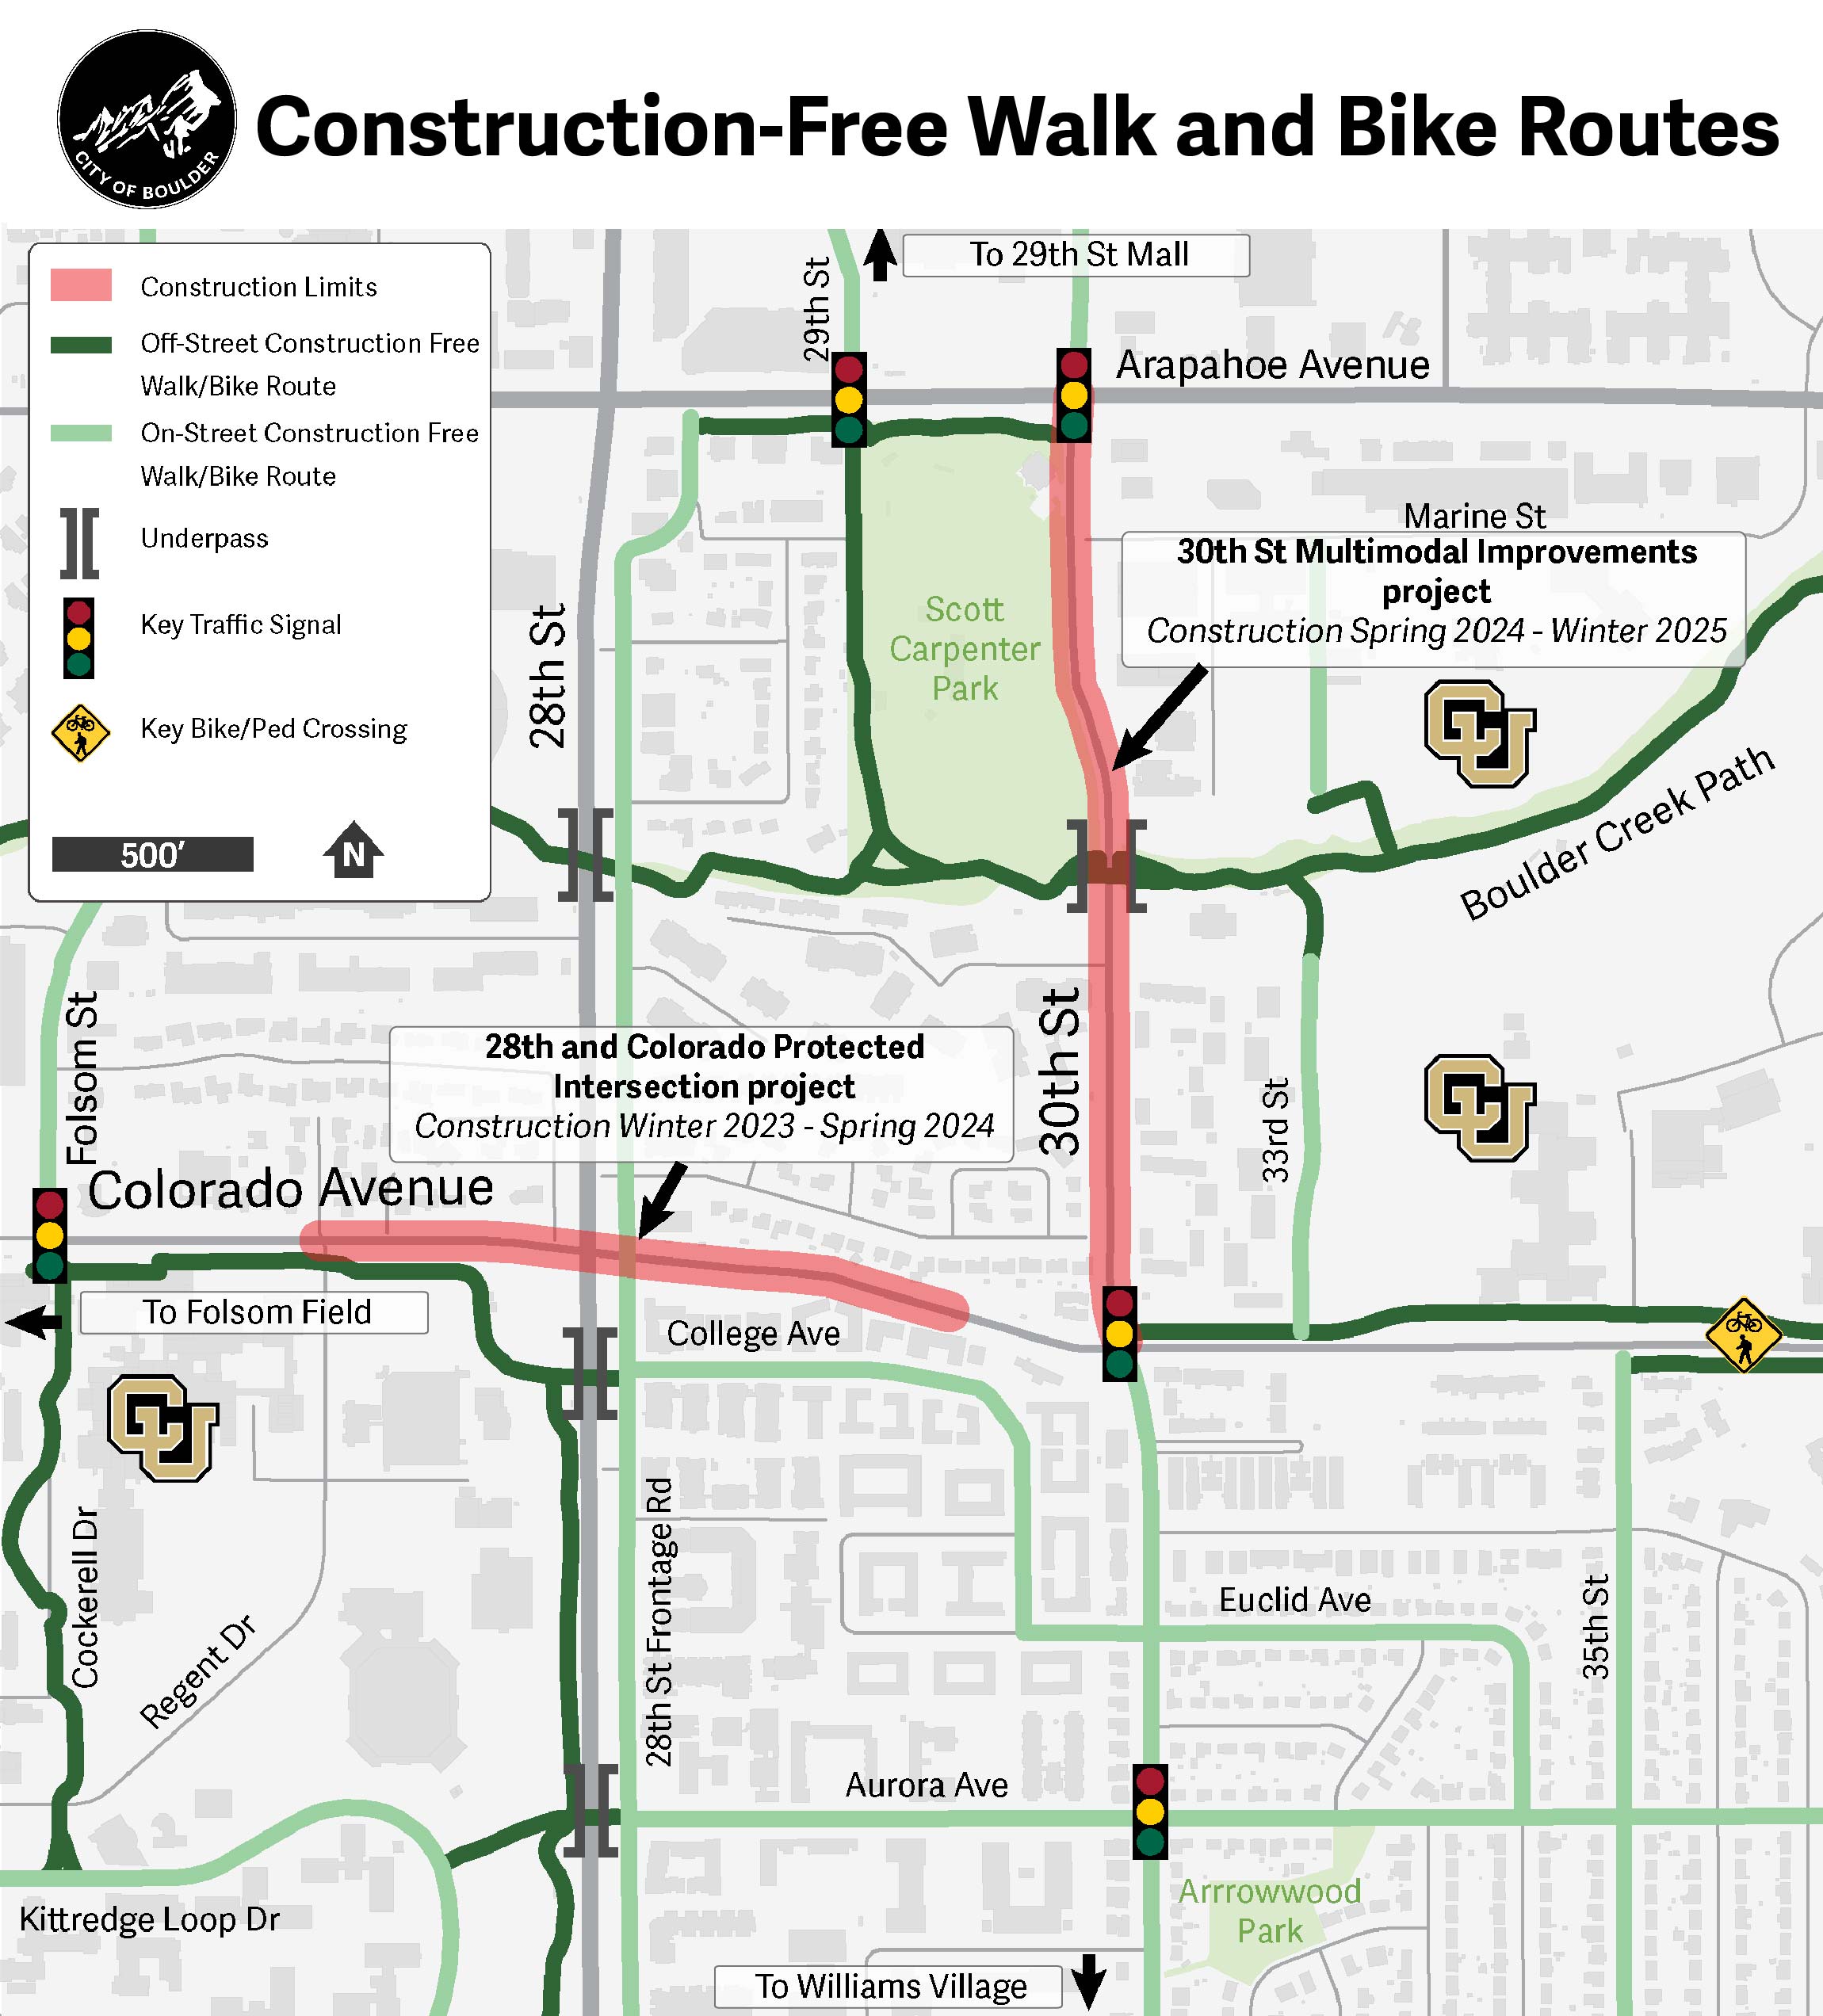 30th Street and Colorado Avenue Construction-Free Walk and Bike Routes. Long description in caption.